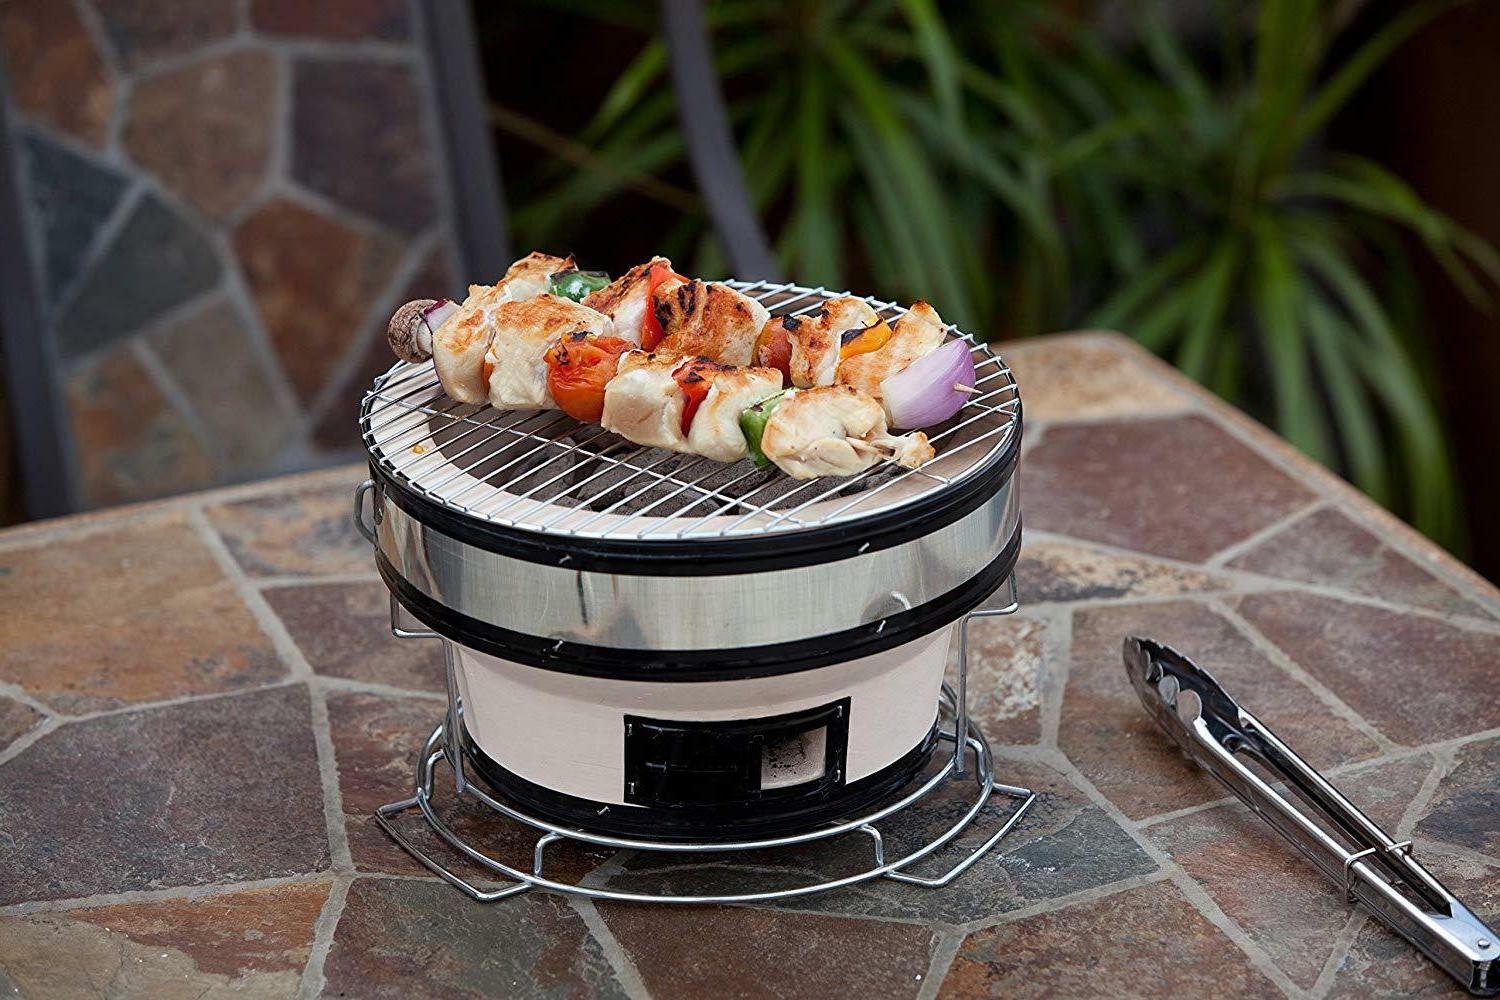 Ironmaster Hibachi Grill Outdoor, Small Portable Charcoal Grill, 100% Pre-Seasoned Cast Iron, Japanese Yakitori Camping Grill